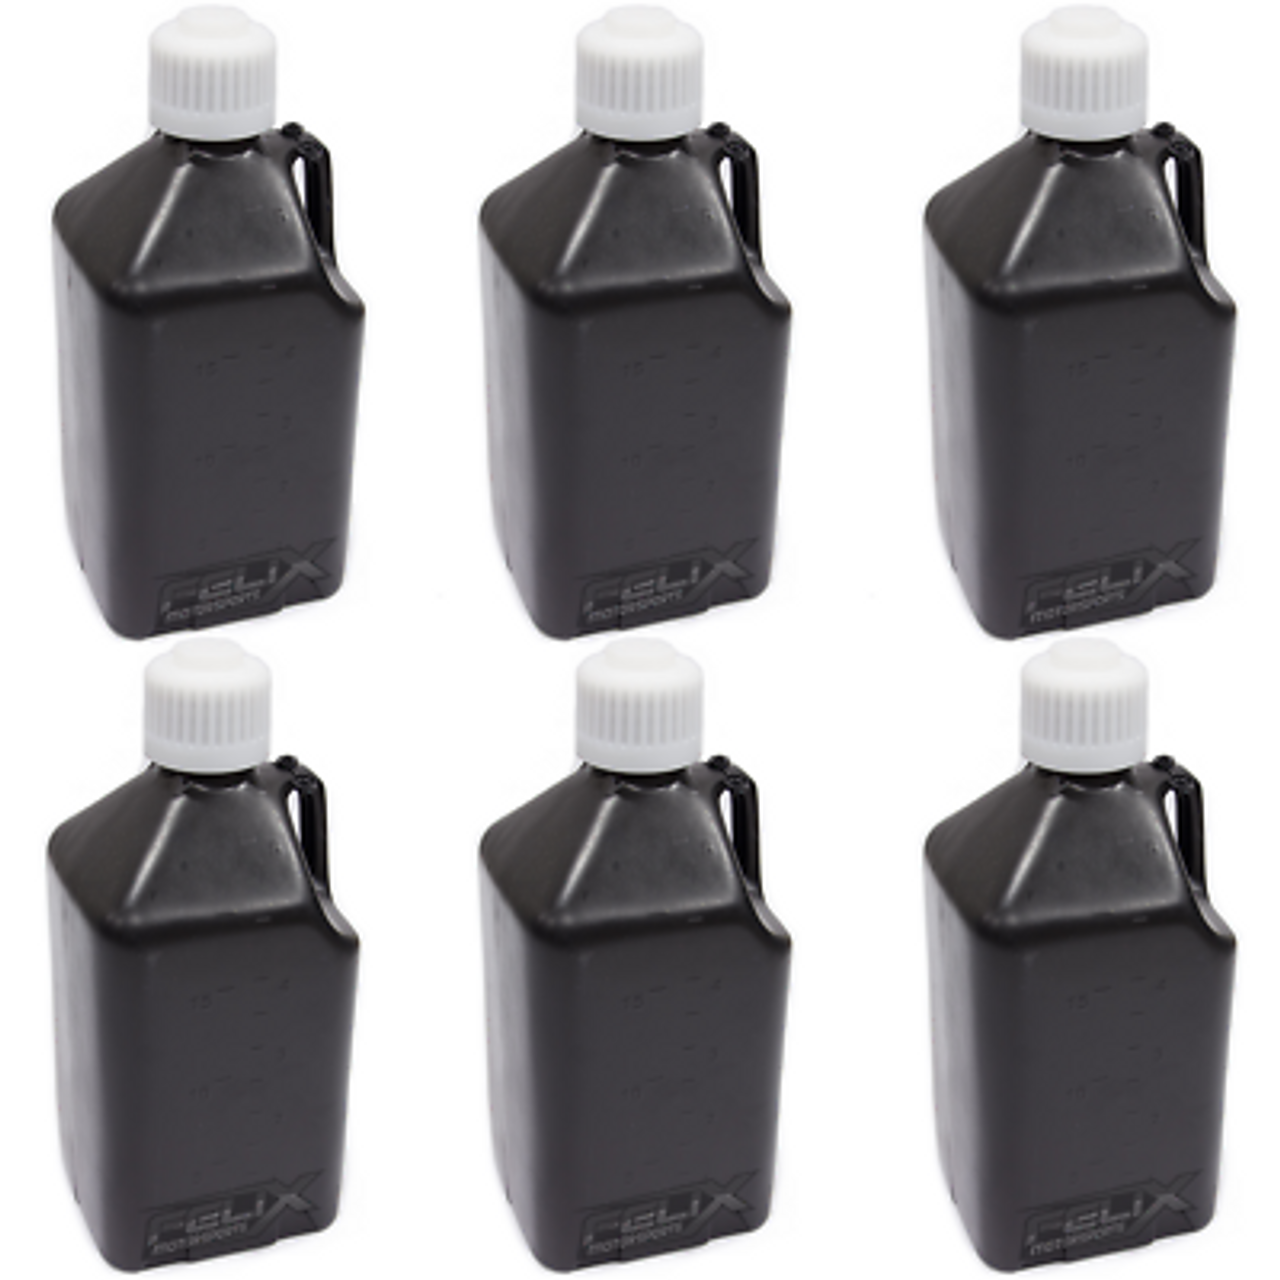 6 - Scribner Plastic Square 5 Gallon Utility Jugs Cans (Six Pack) Black